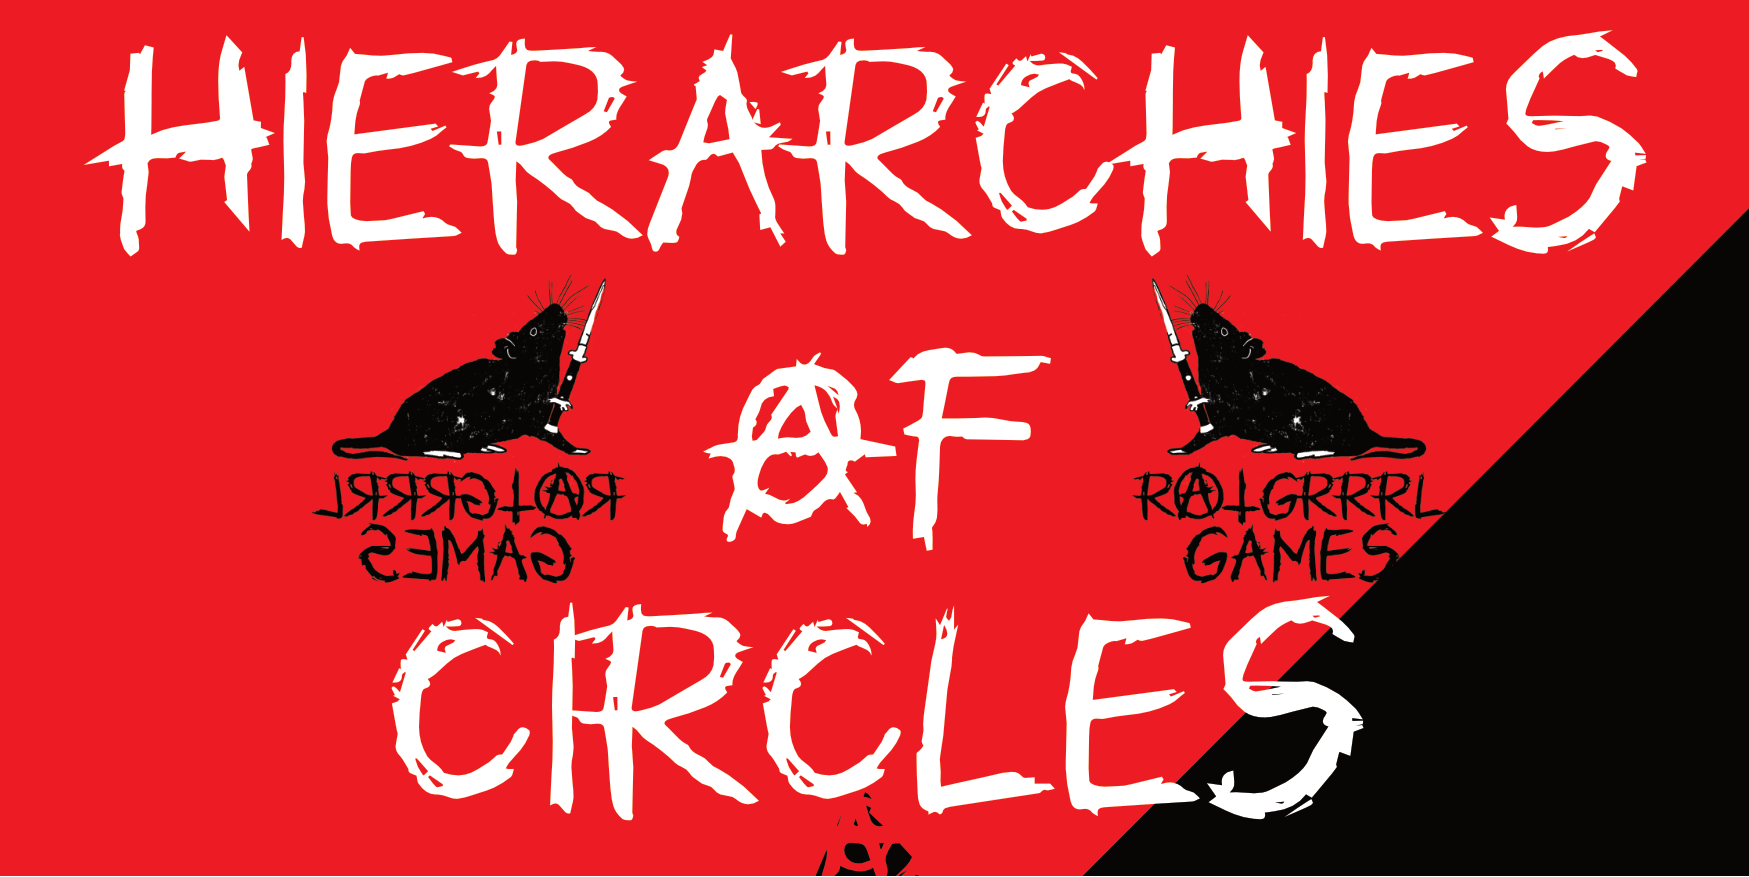 Hierachies of Circles